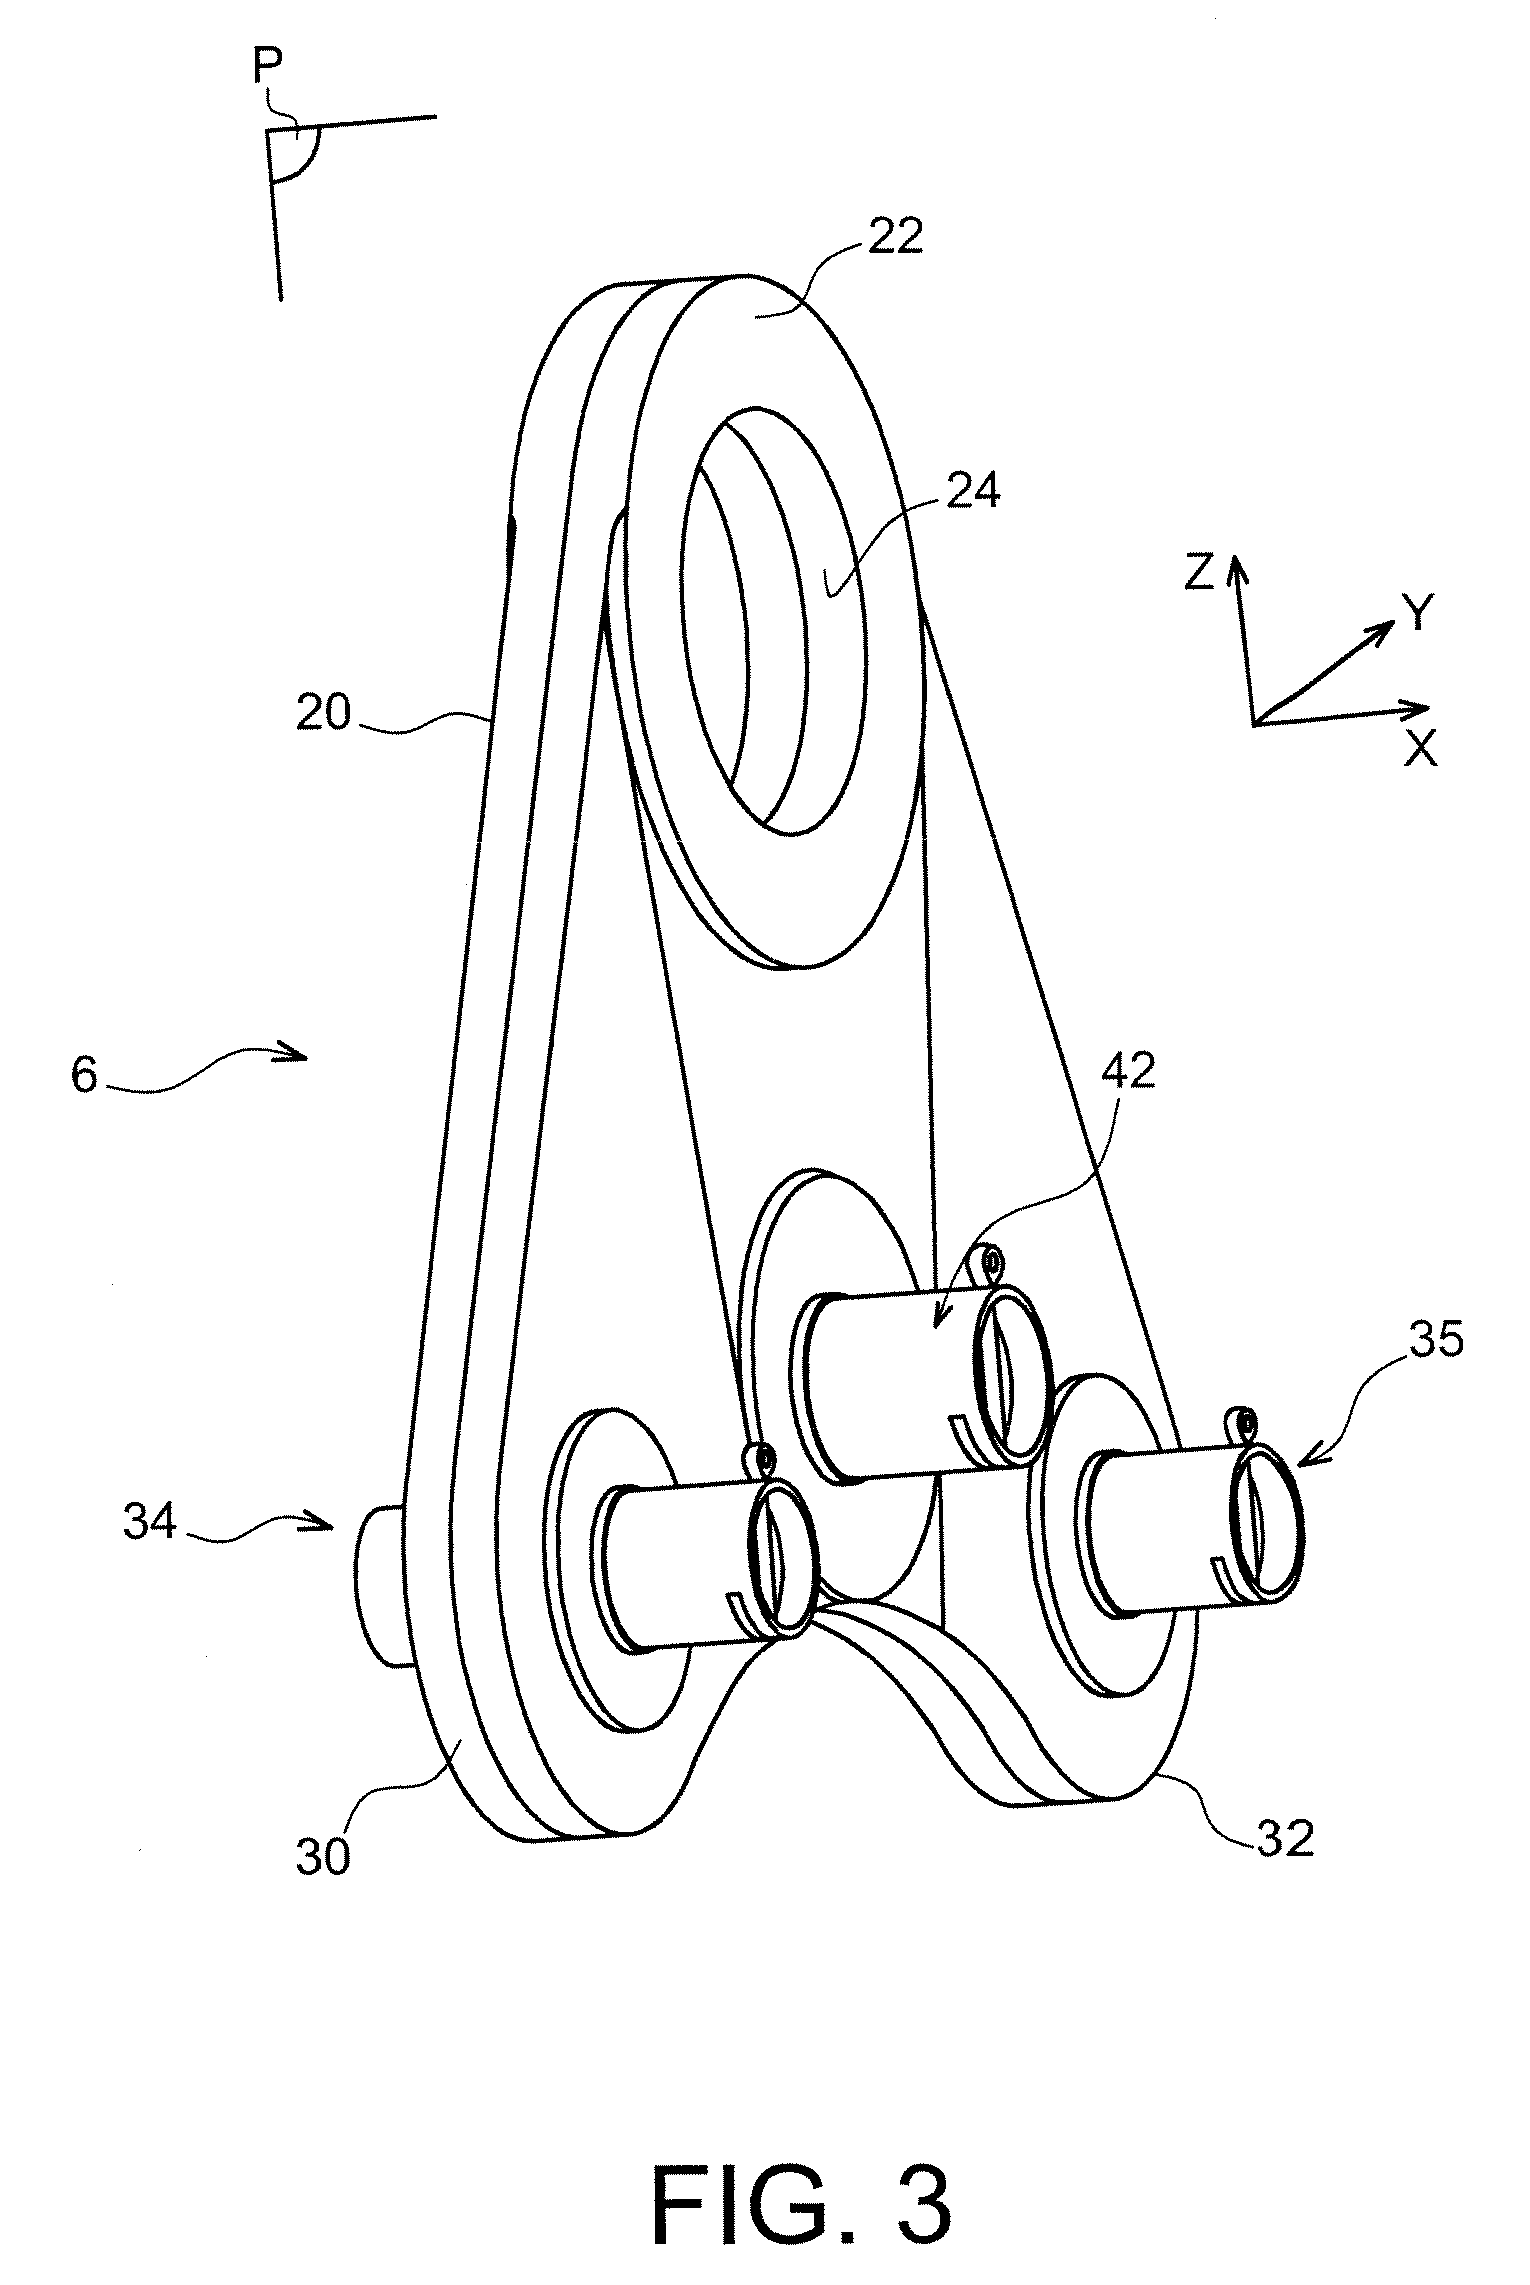 Engine Mount For an Aircraft, to be Placed Between an Engine and an Engin Mounting Structure